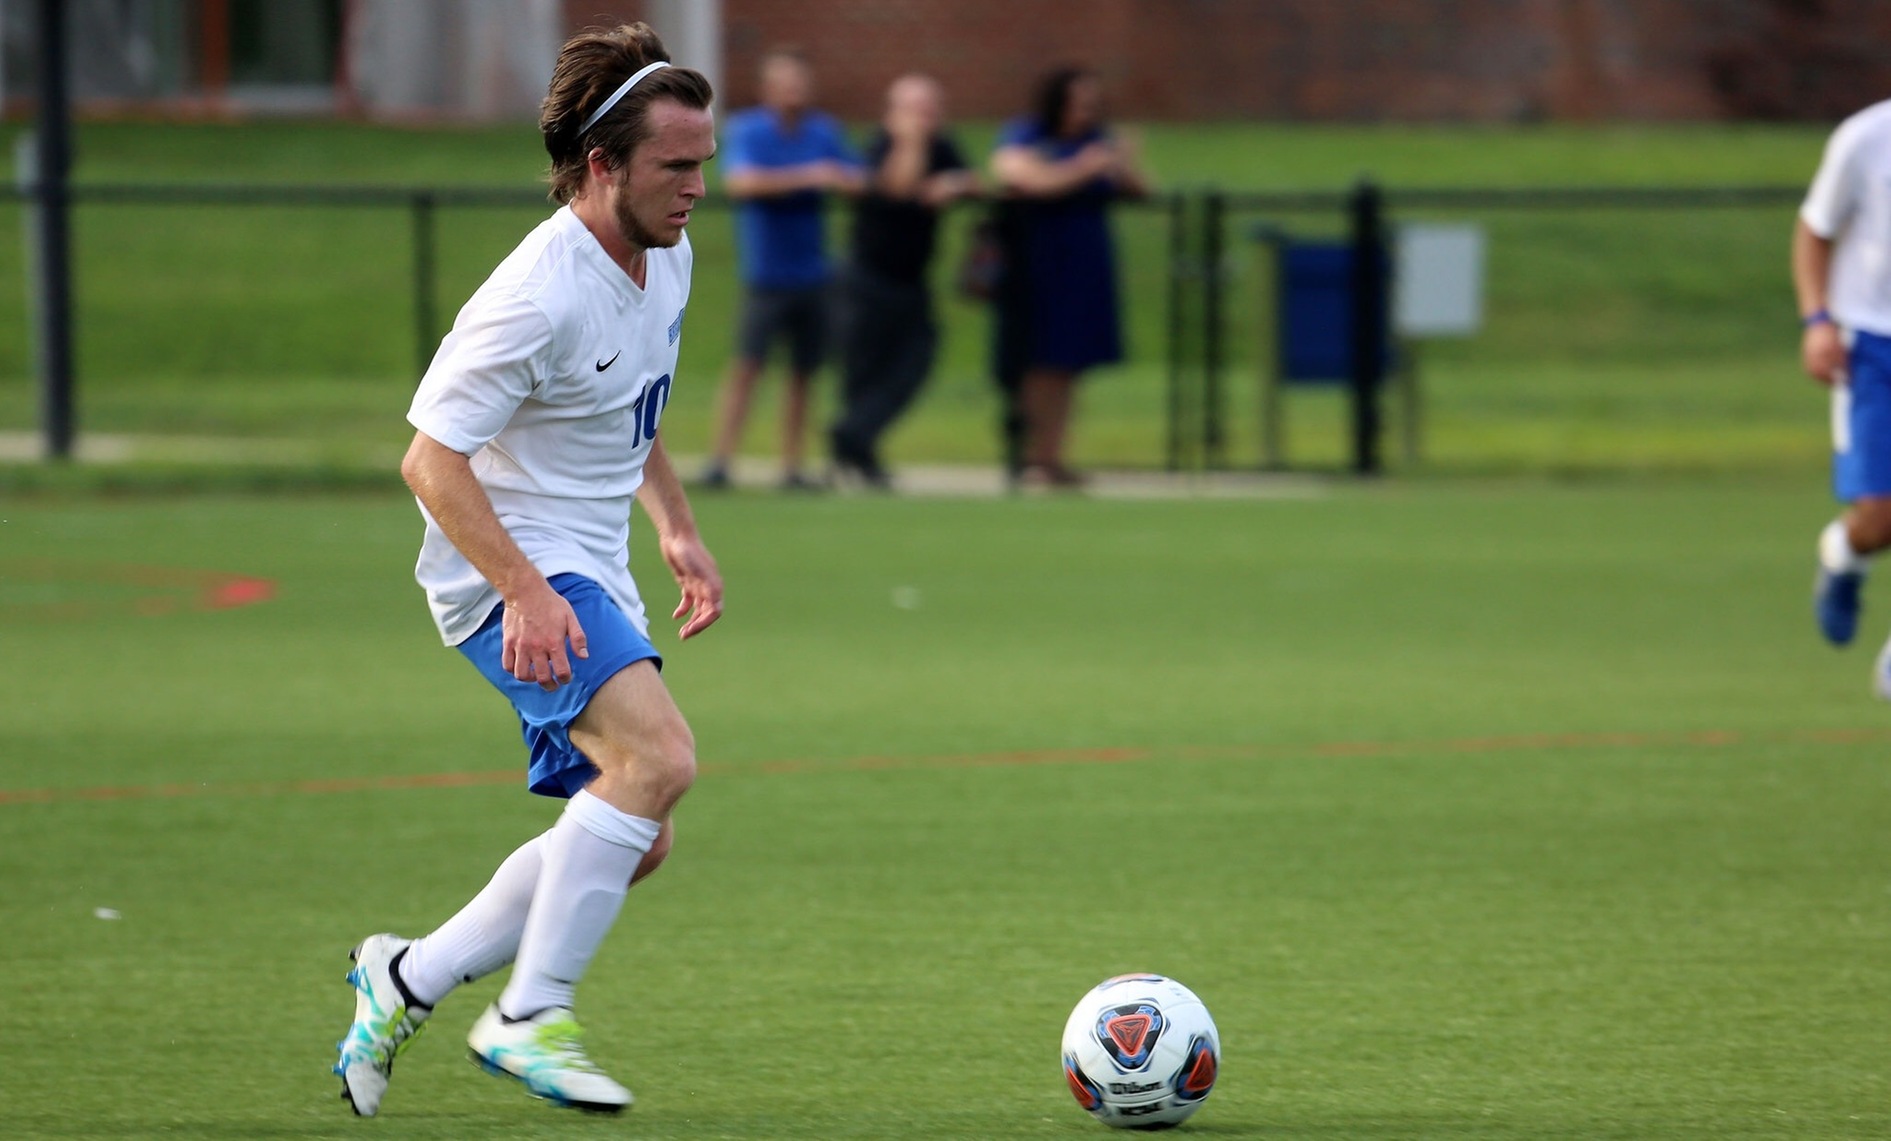 Tornados Win Second Straight Game Behind Two Goals by Tuttle